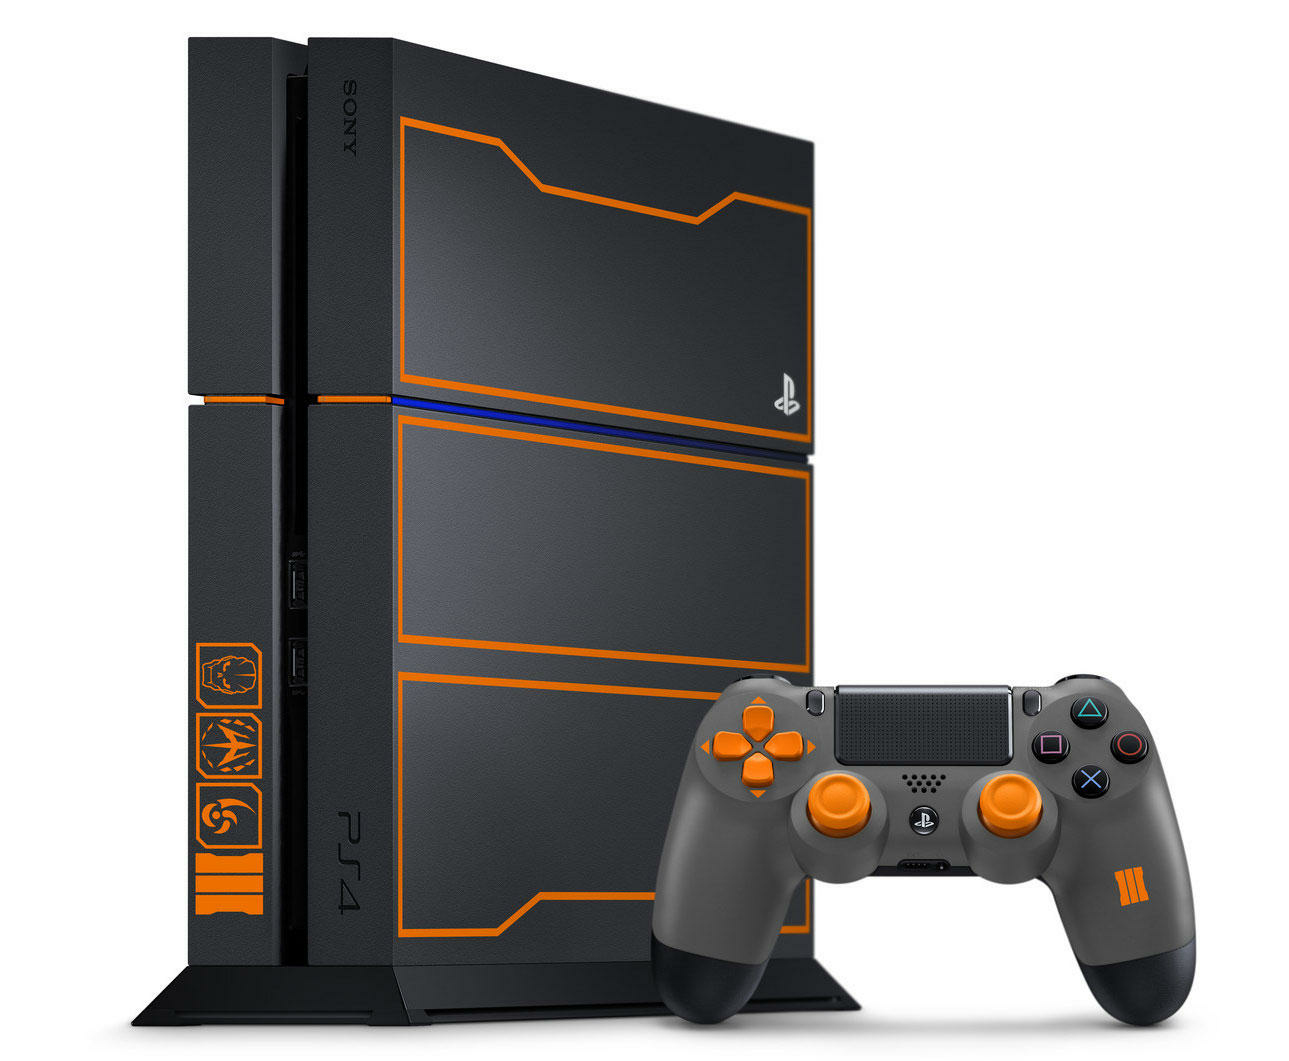 Console PS4 édition limitée Call Of Duty Black Ops III - 1 To